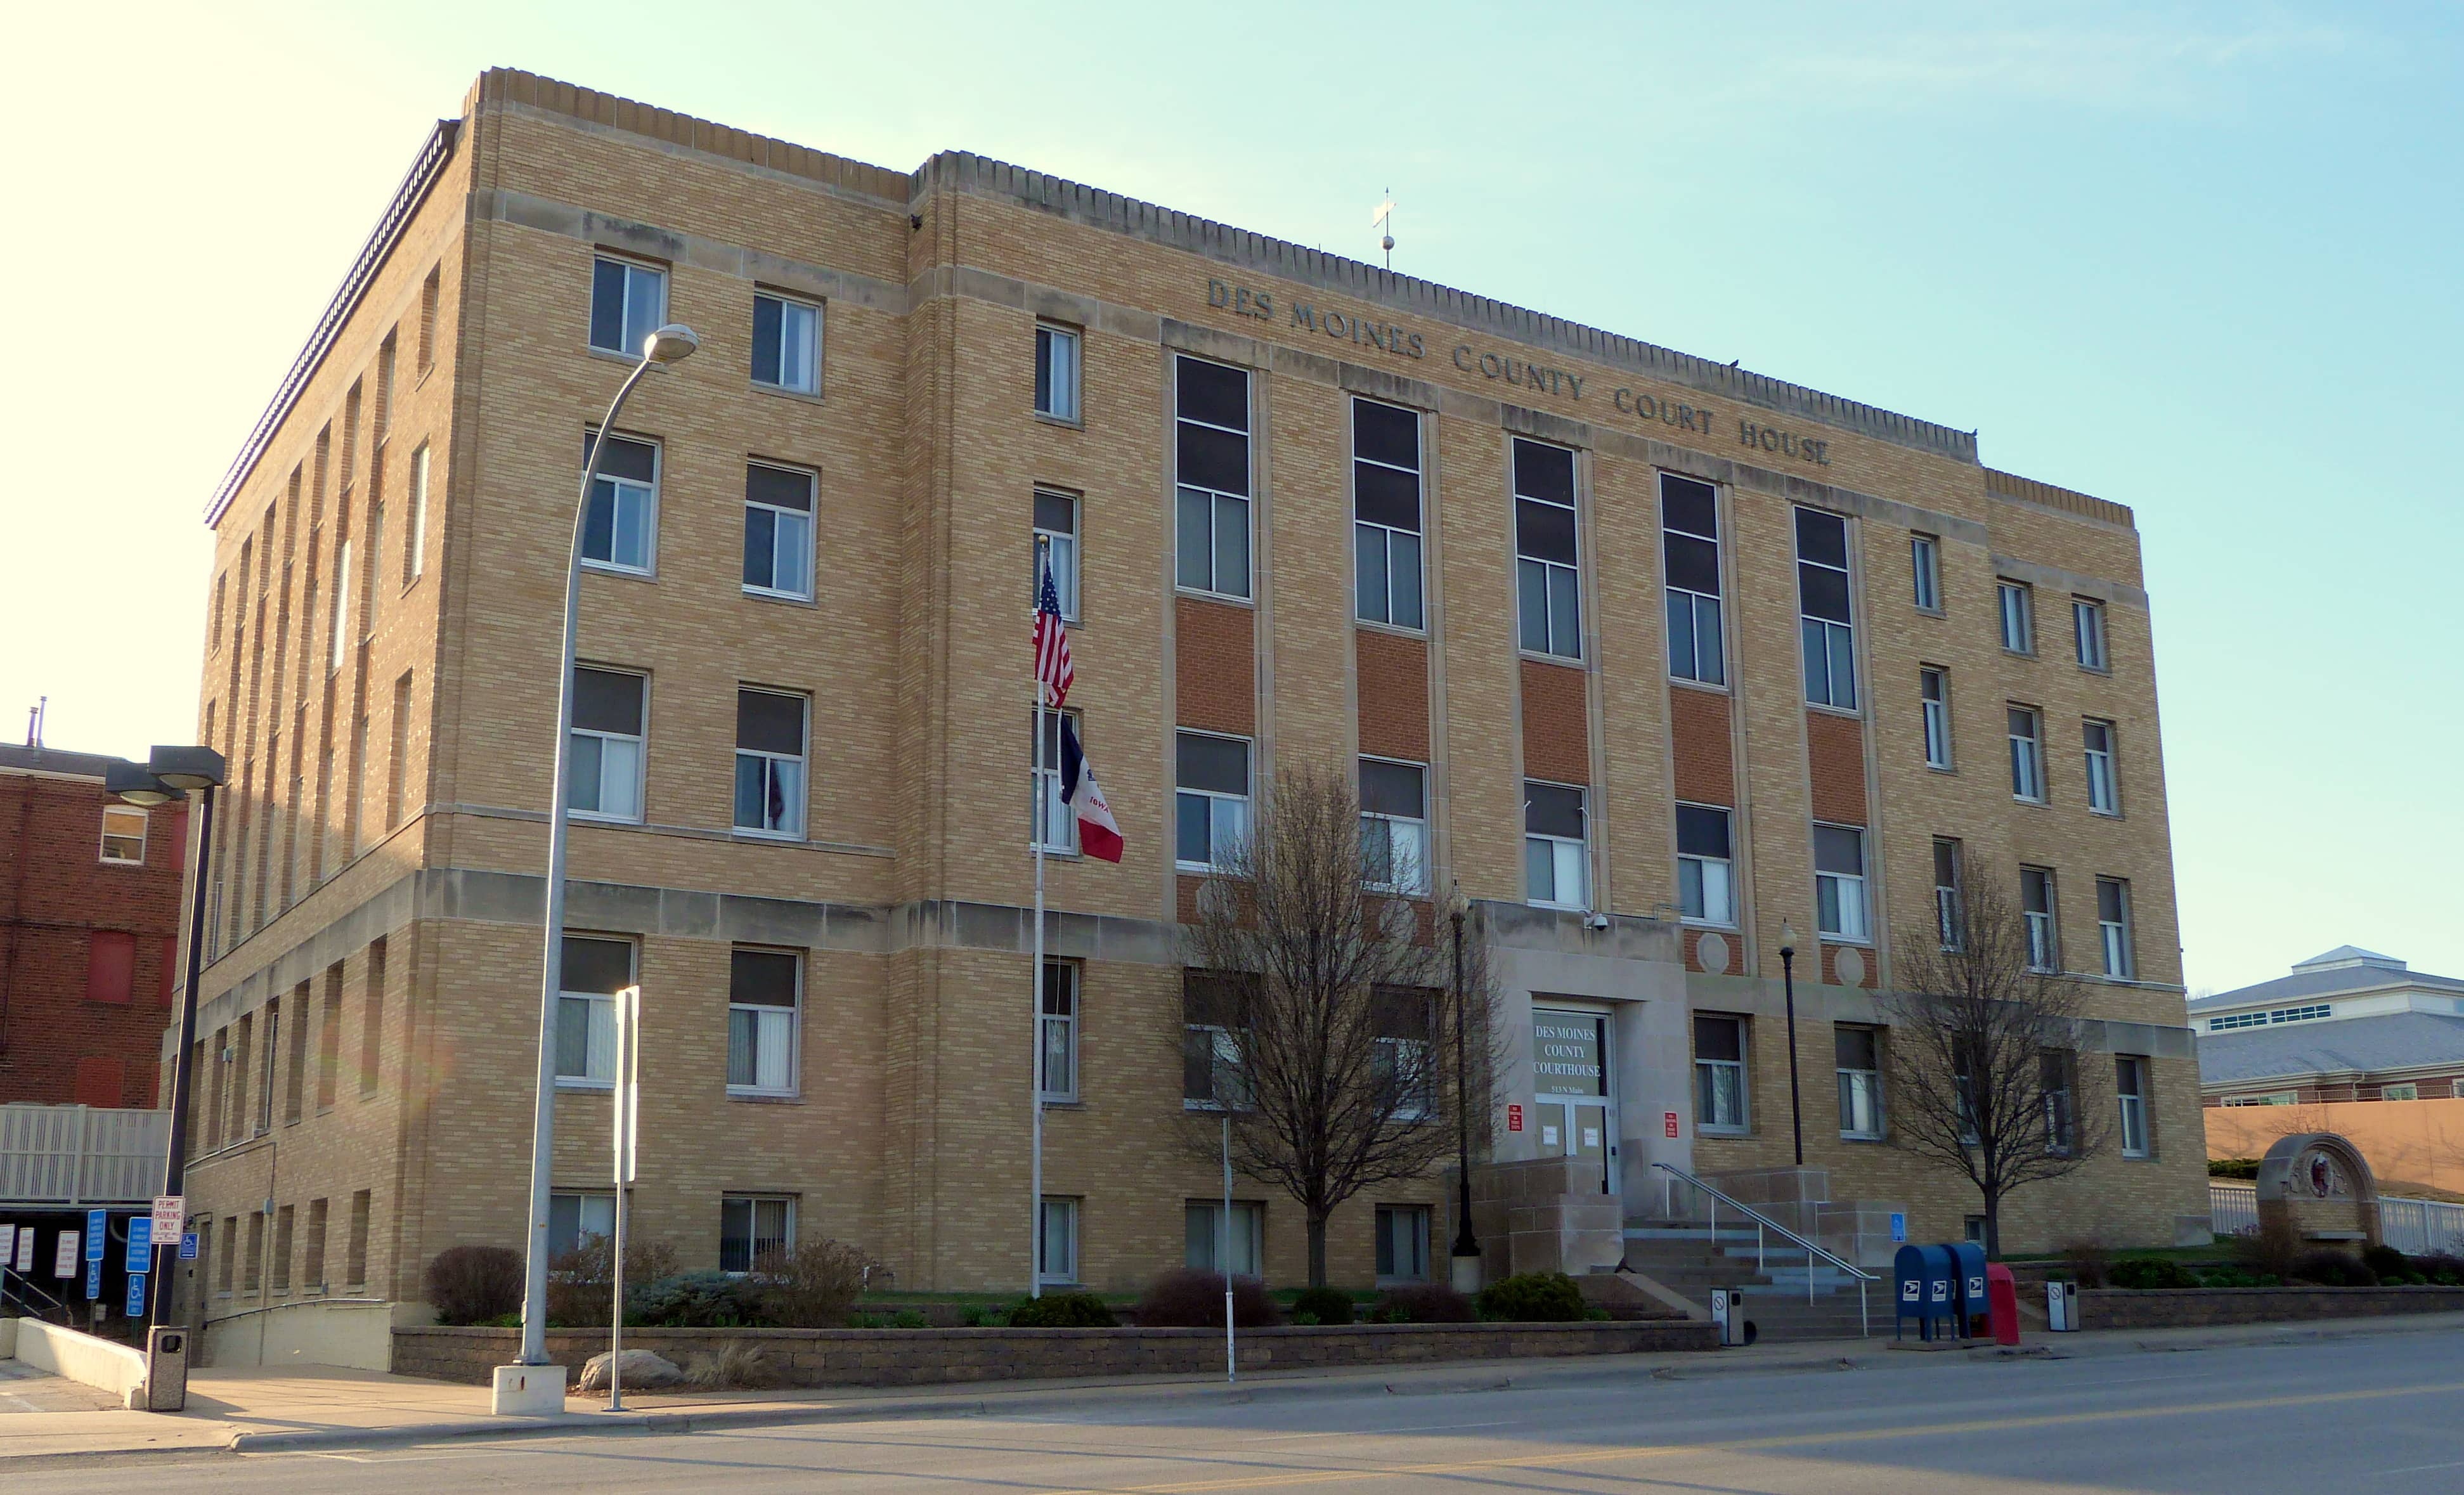 Image of Des Moines County Recorder Des Moines County Courthouse